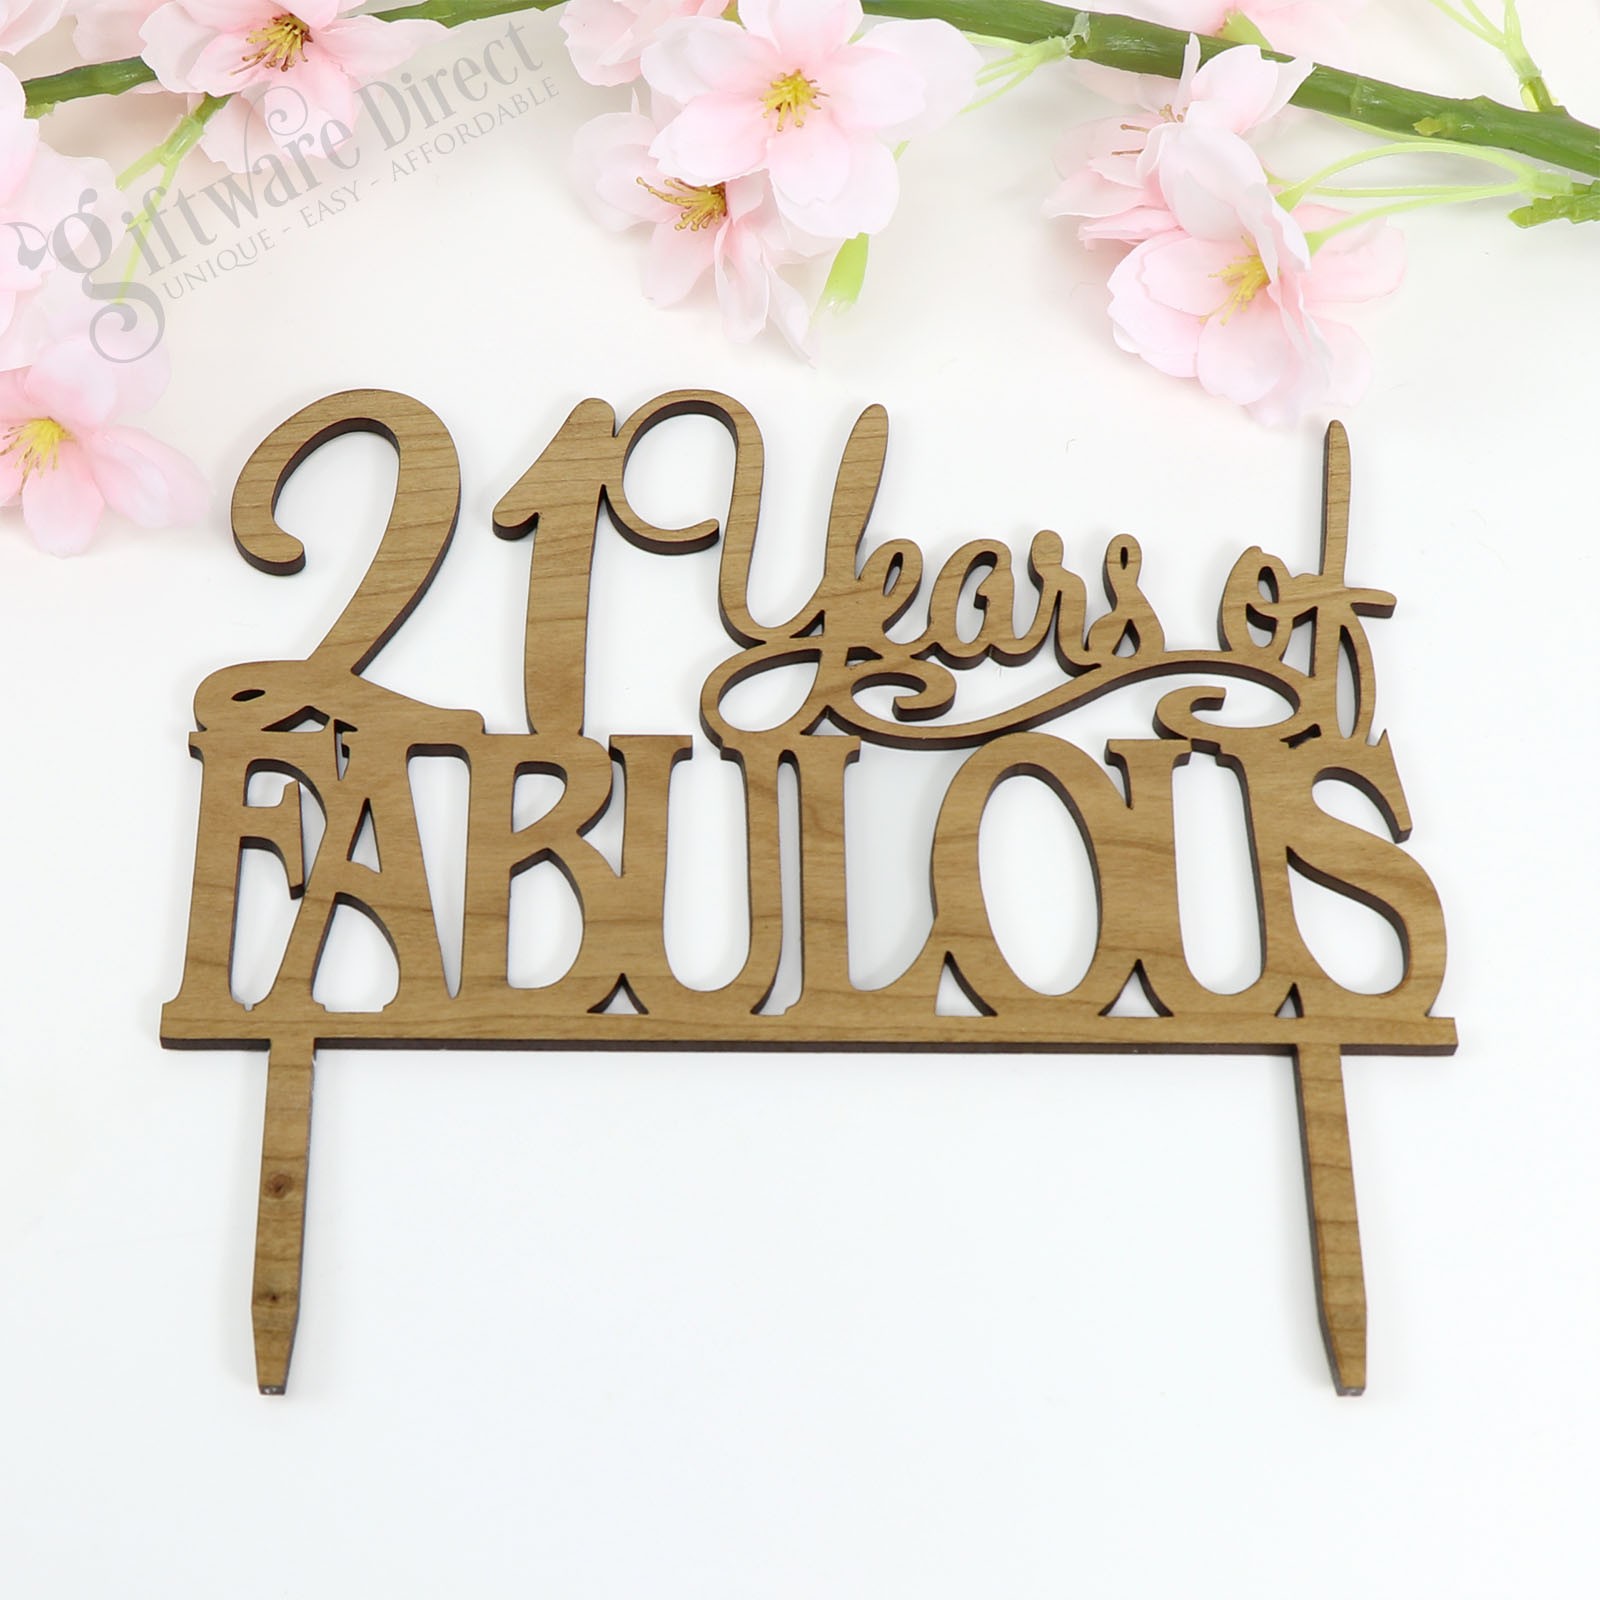 21st Birthday Present Ideas 21 Years of Fabulous Birthday Bamboo Cake Topper Any Age cake topper